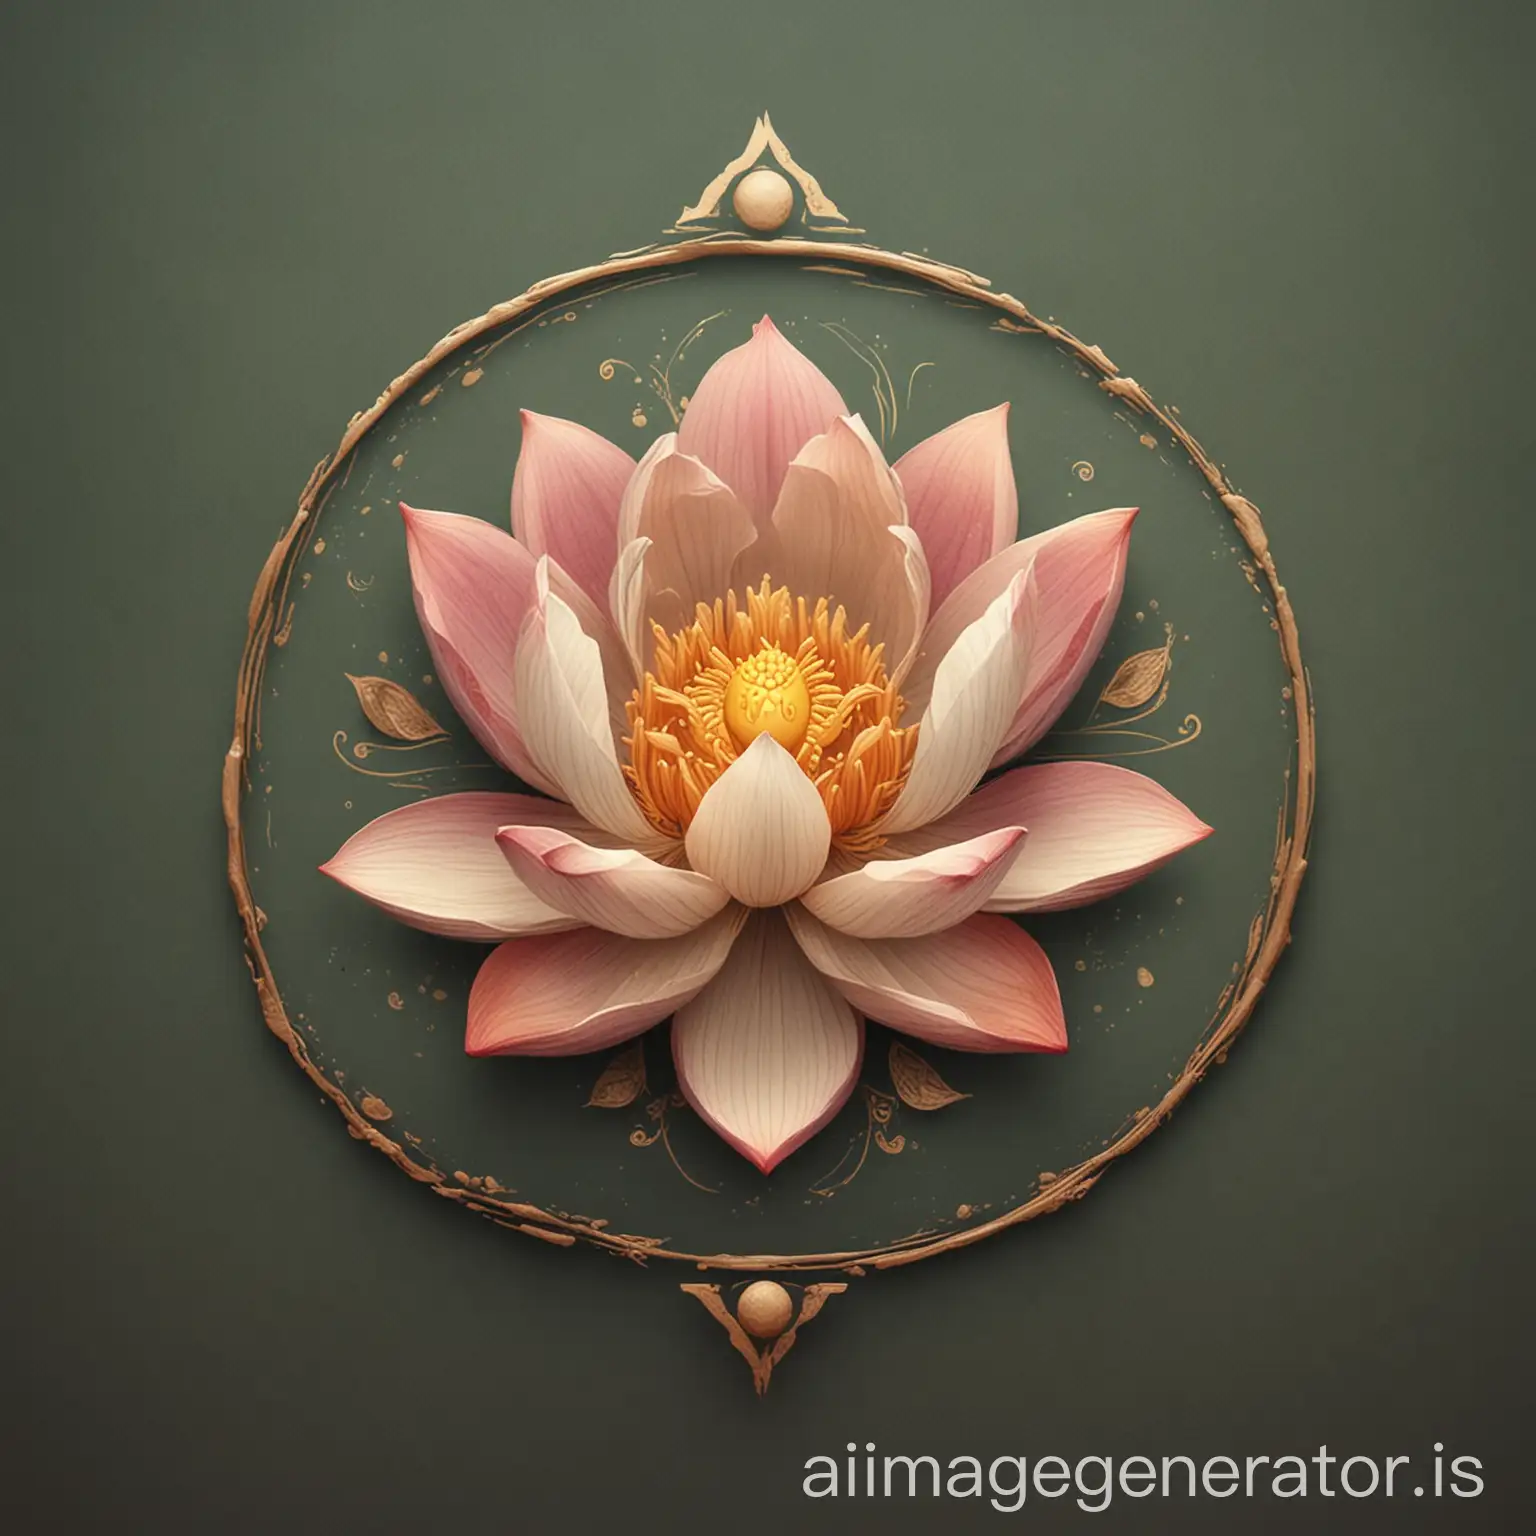 7Day-Meditation-Course-Logo-Tranquil-Lotus-Flower-and-Rising-Sun-Design